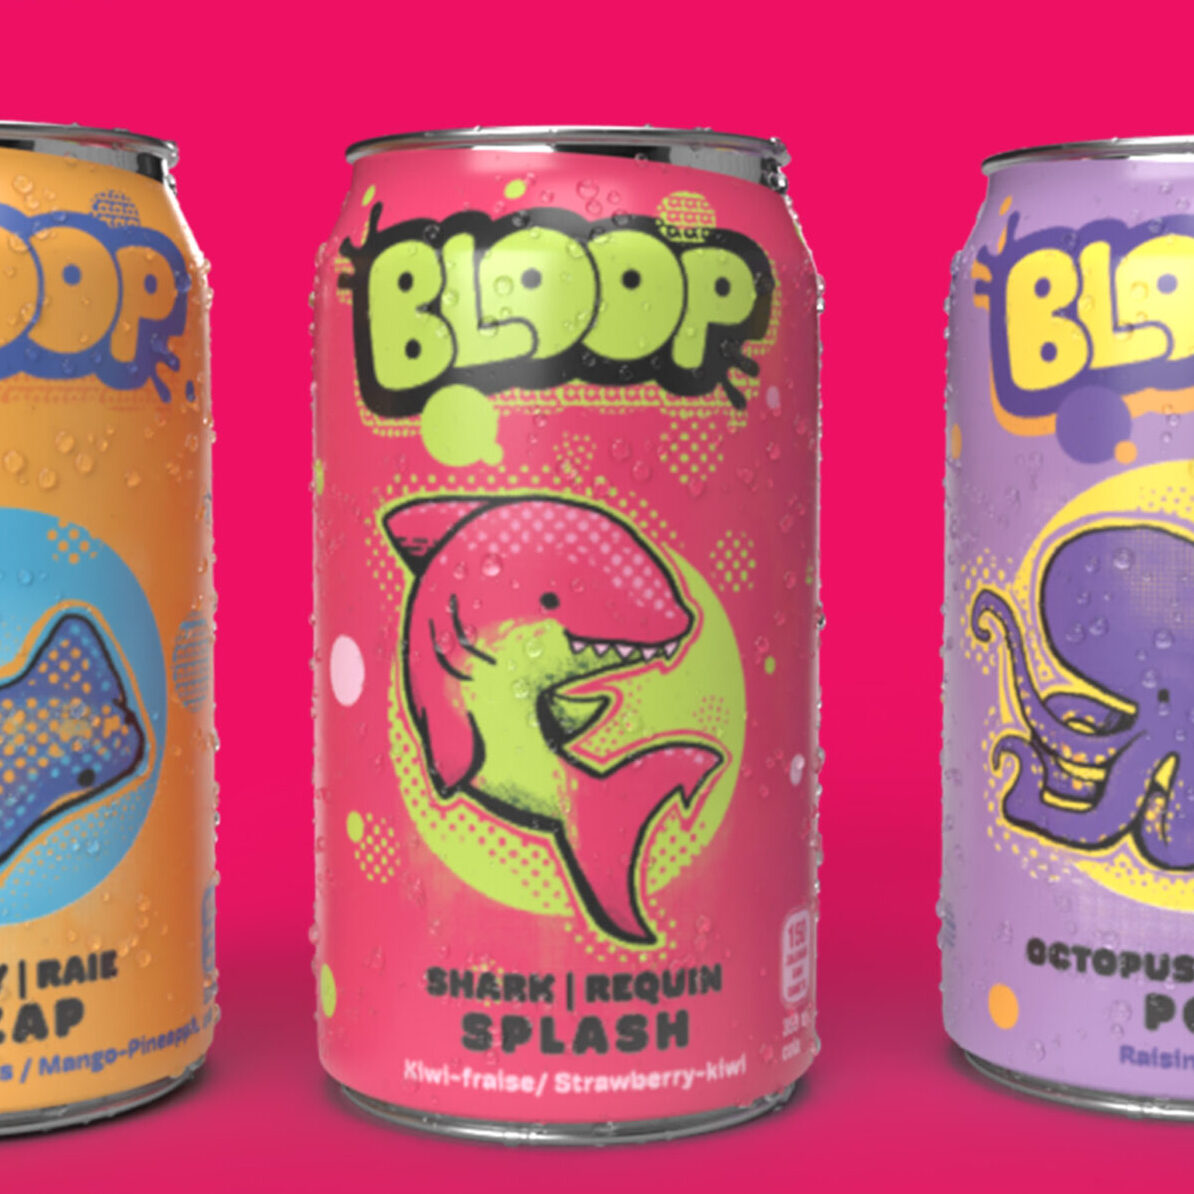 Cropped image of three drink cans of a sparkling fruit drink with sea creatures on them.